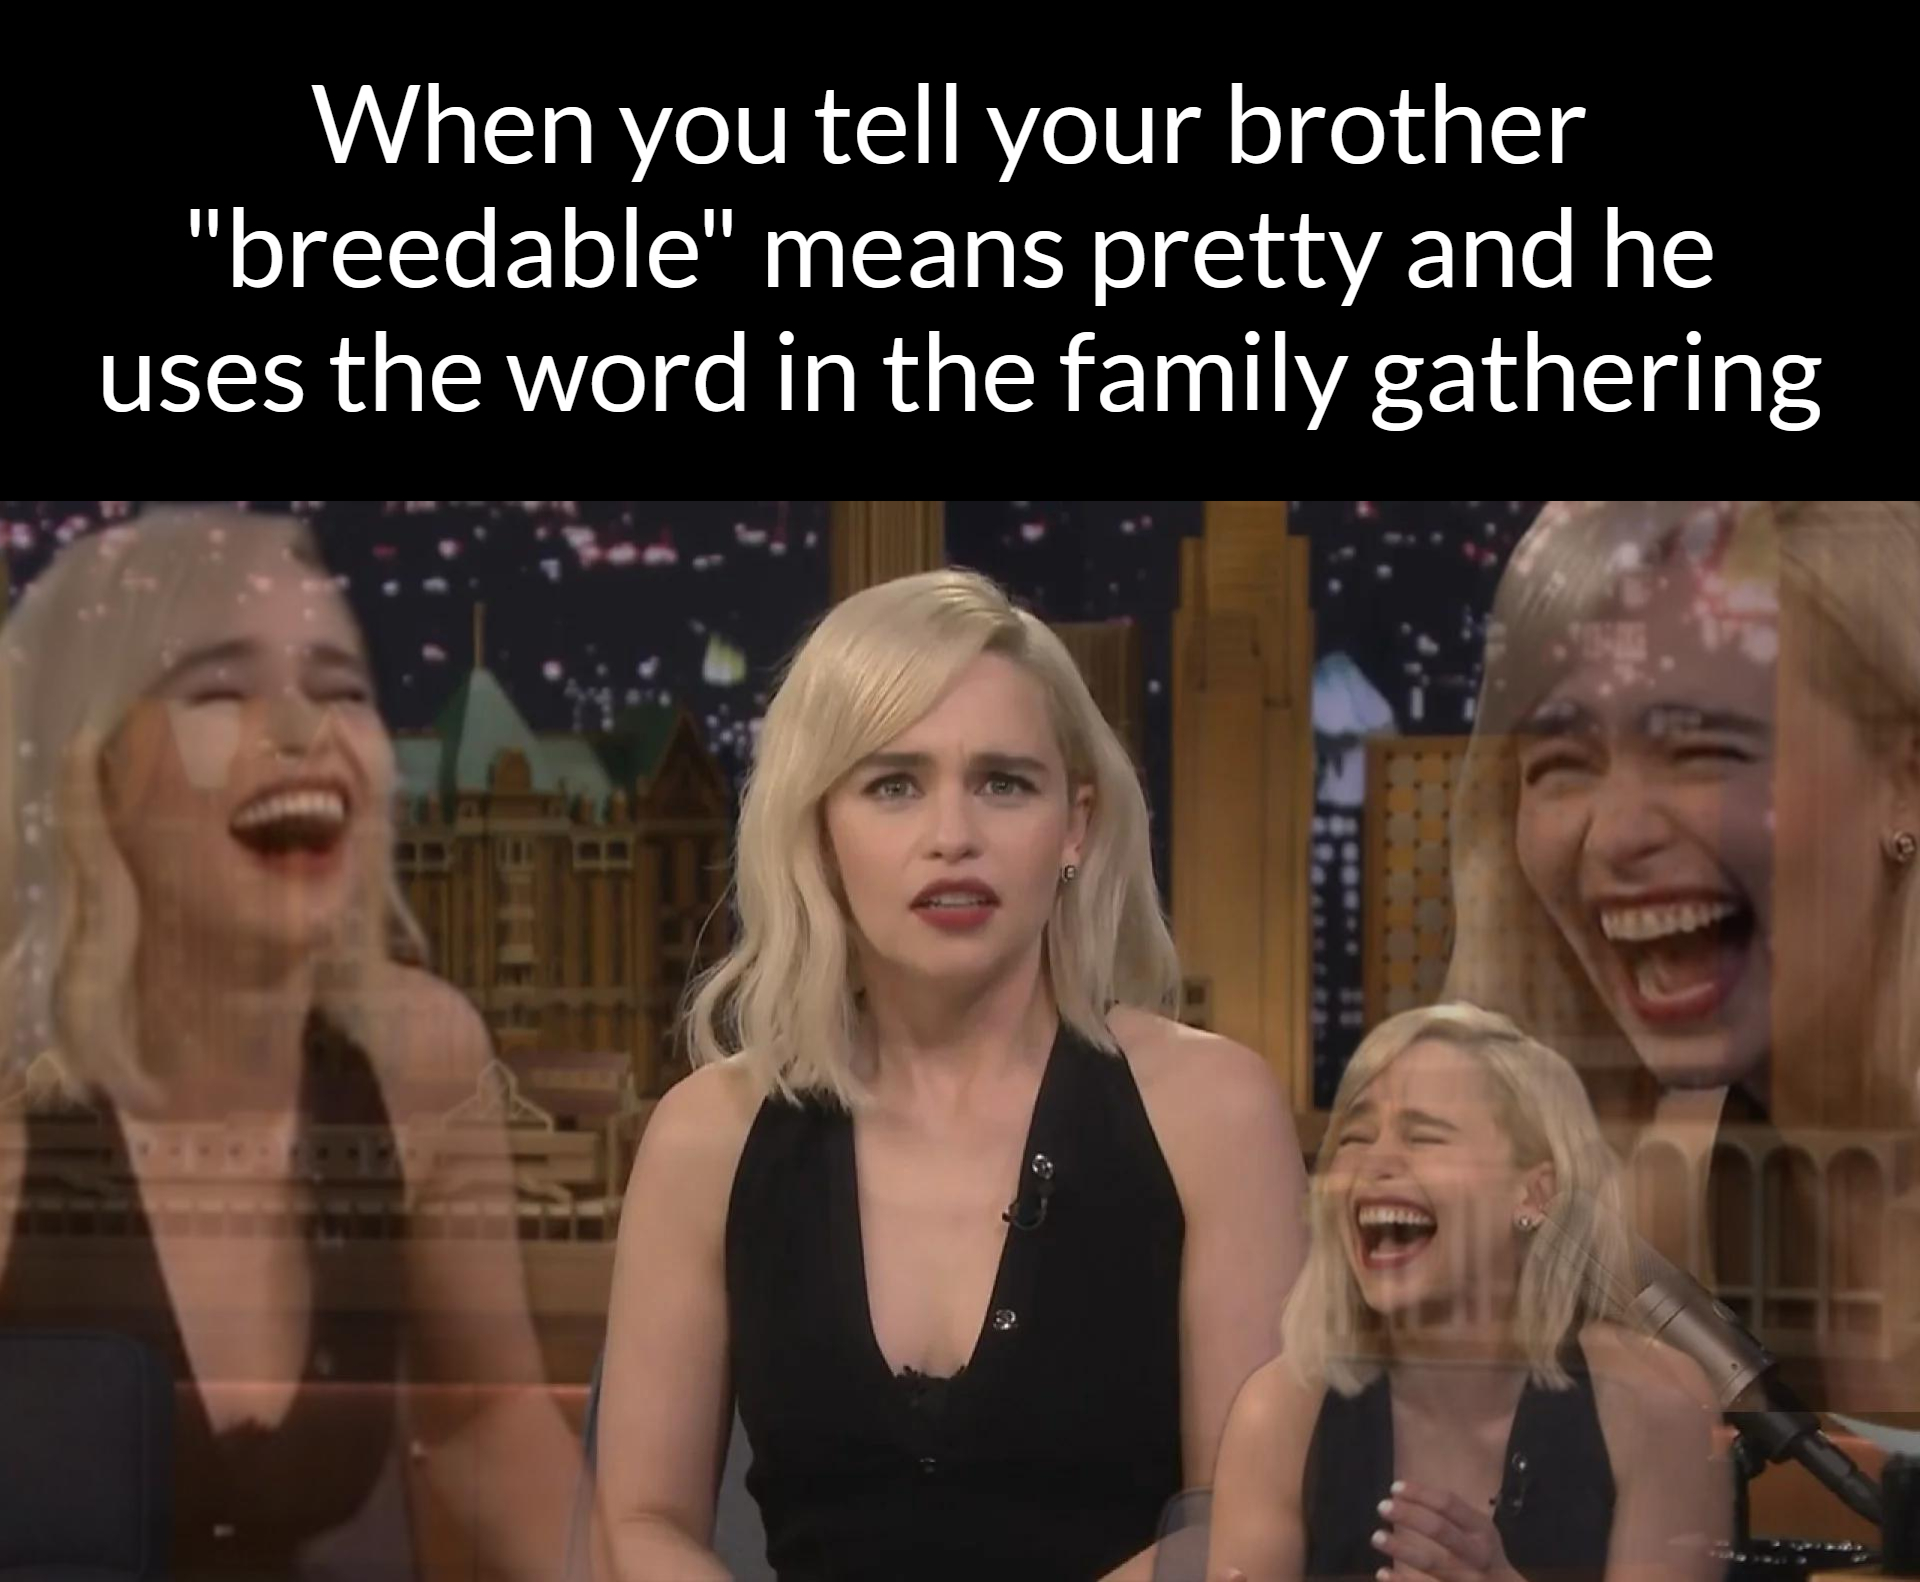 funny dank memes - lyrics - When you tell your brother "breedable" means pretty and he uses the word in the family gathering